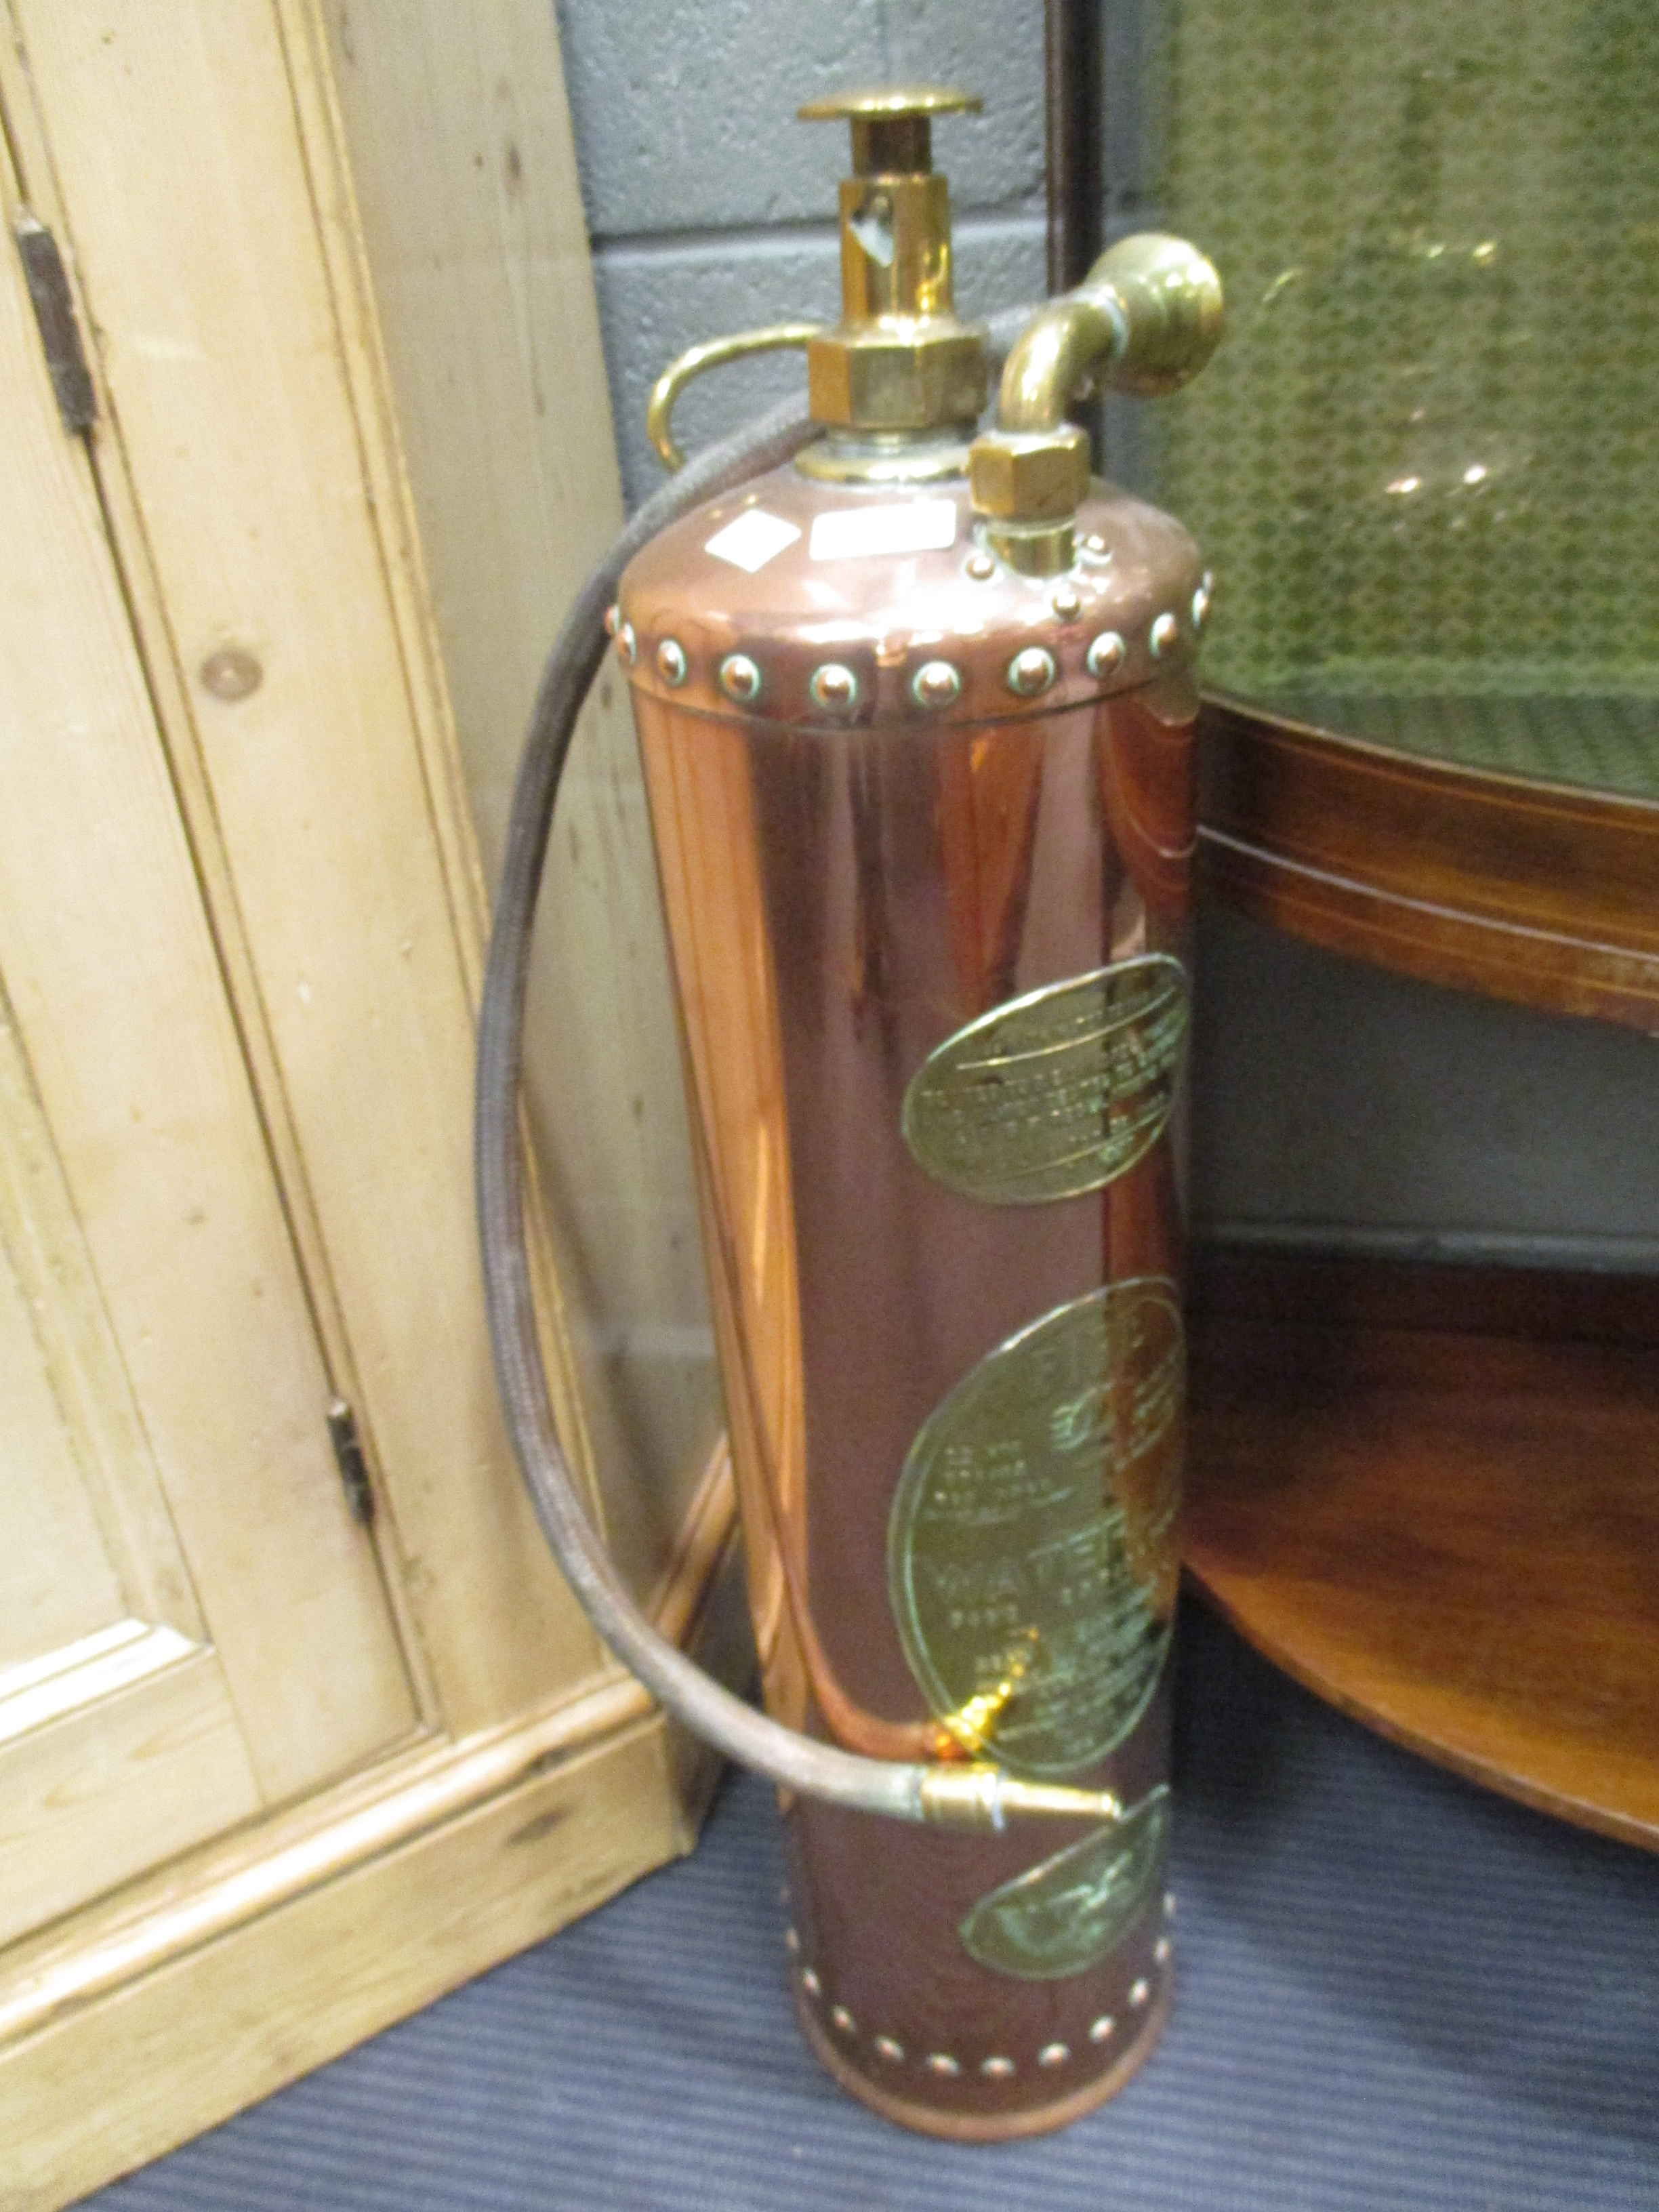 Two copper preserve pans, a tray and a fire extinguisher